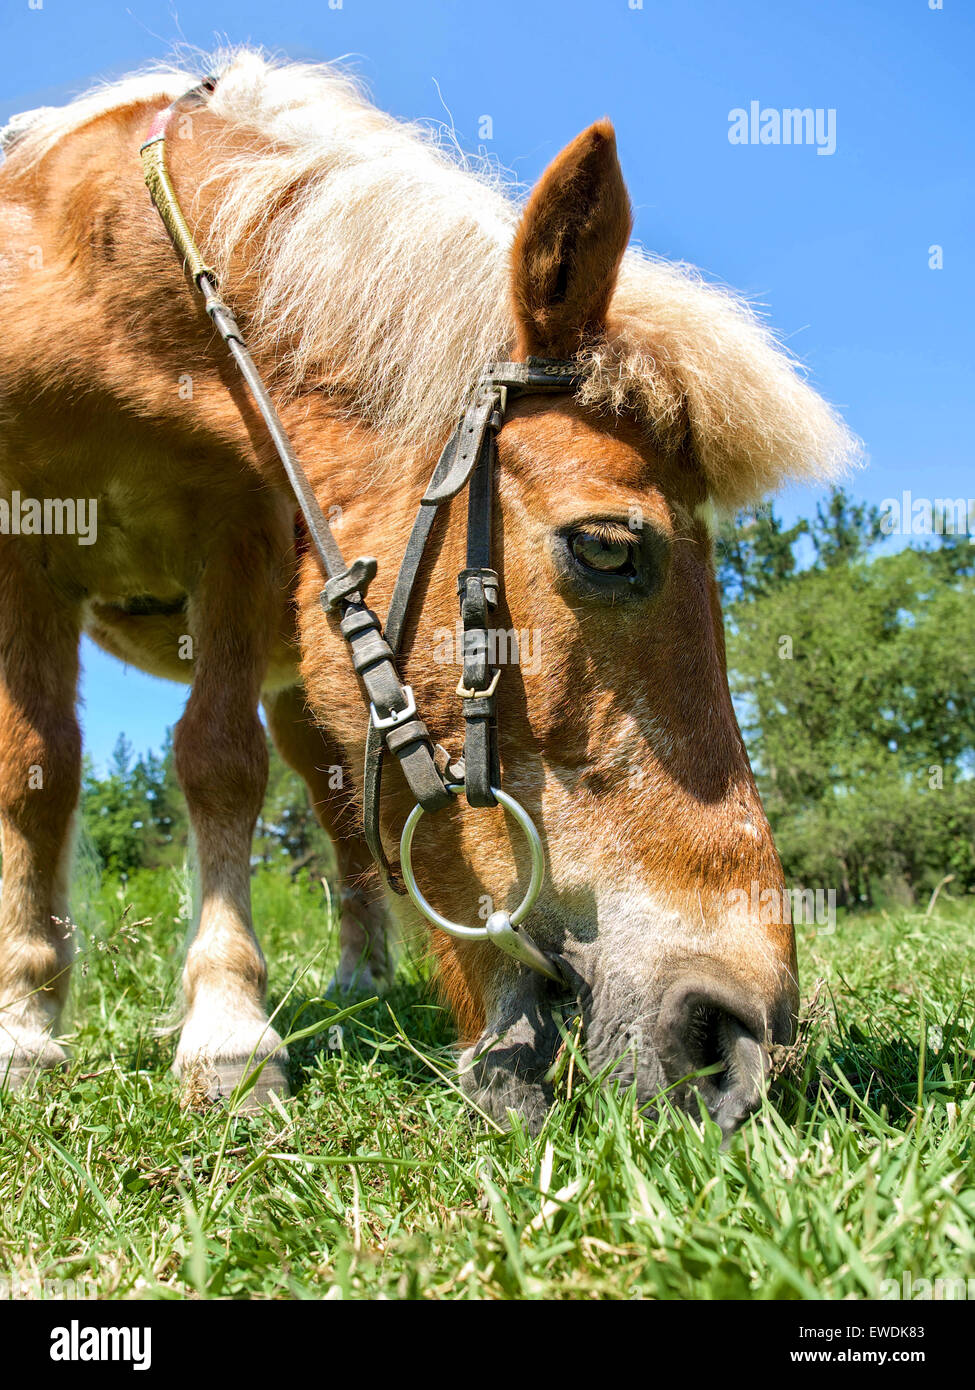 A pony eating at prairie Stock Photo